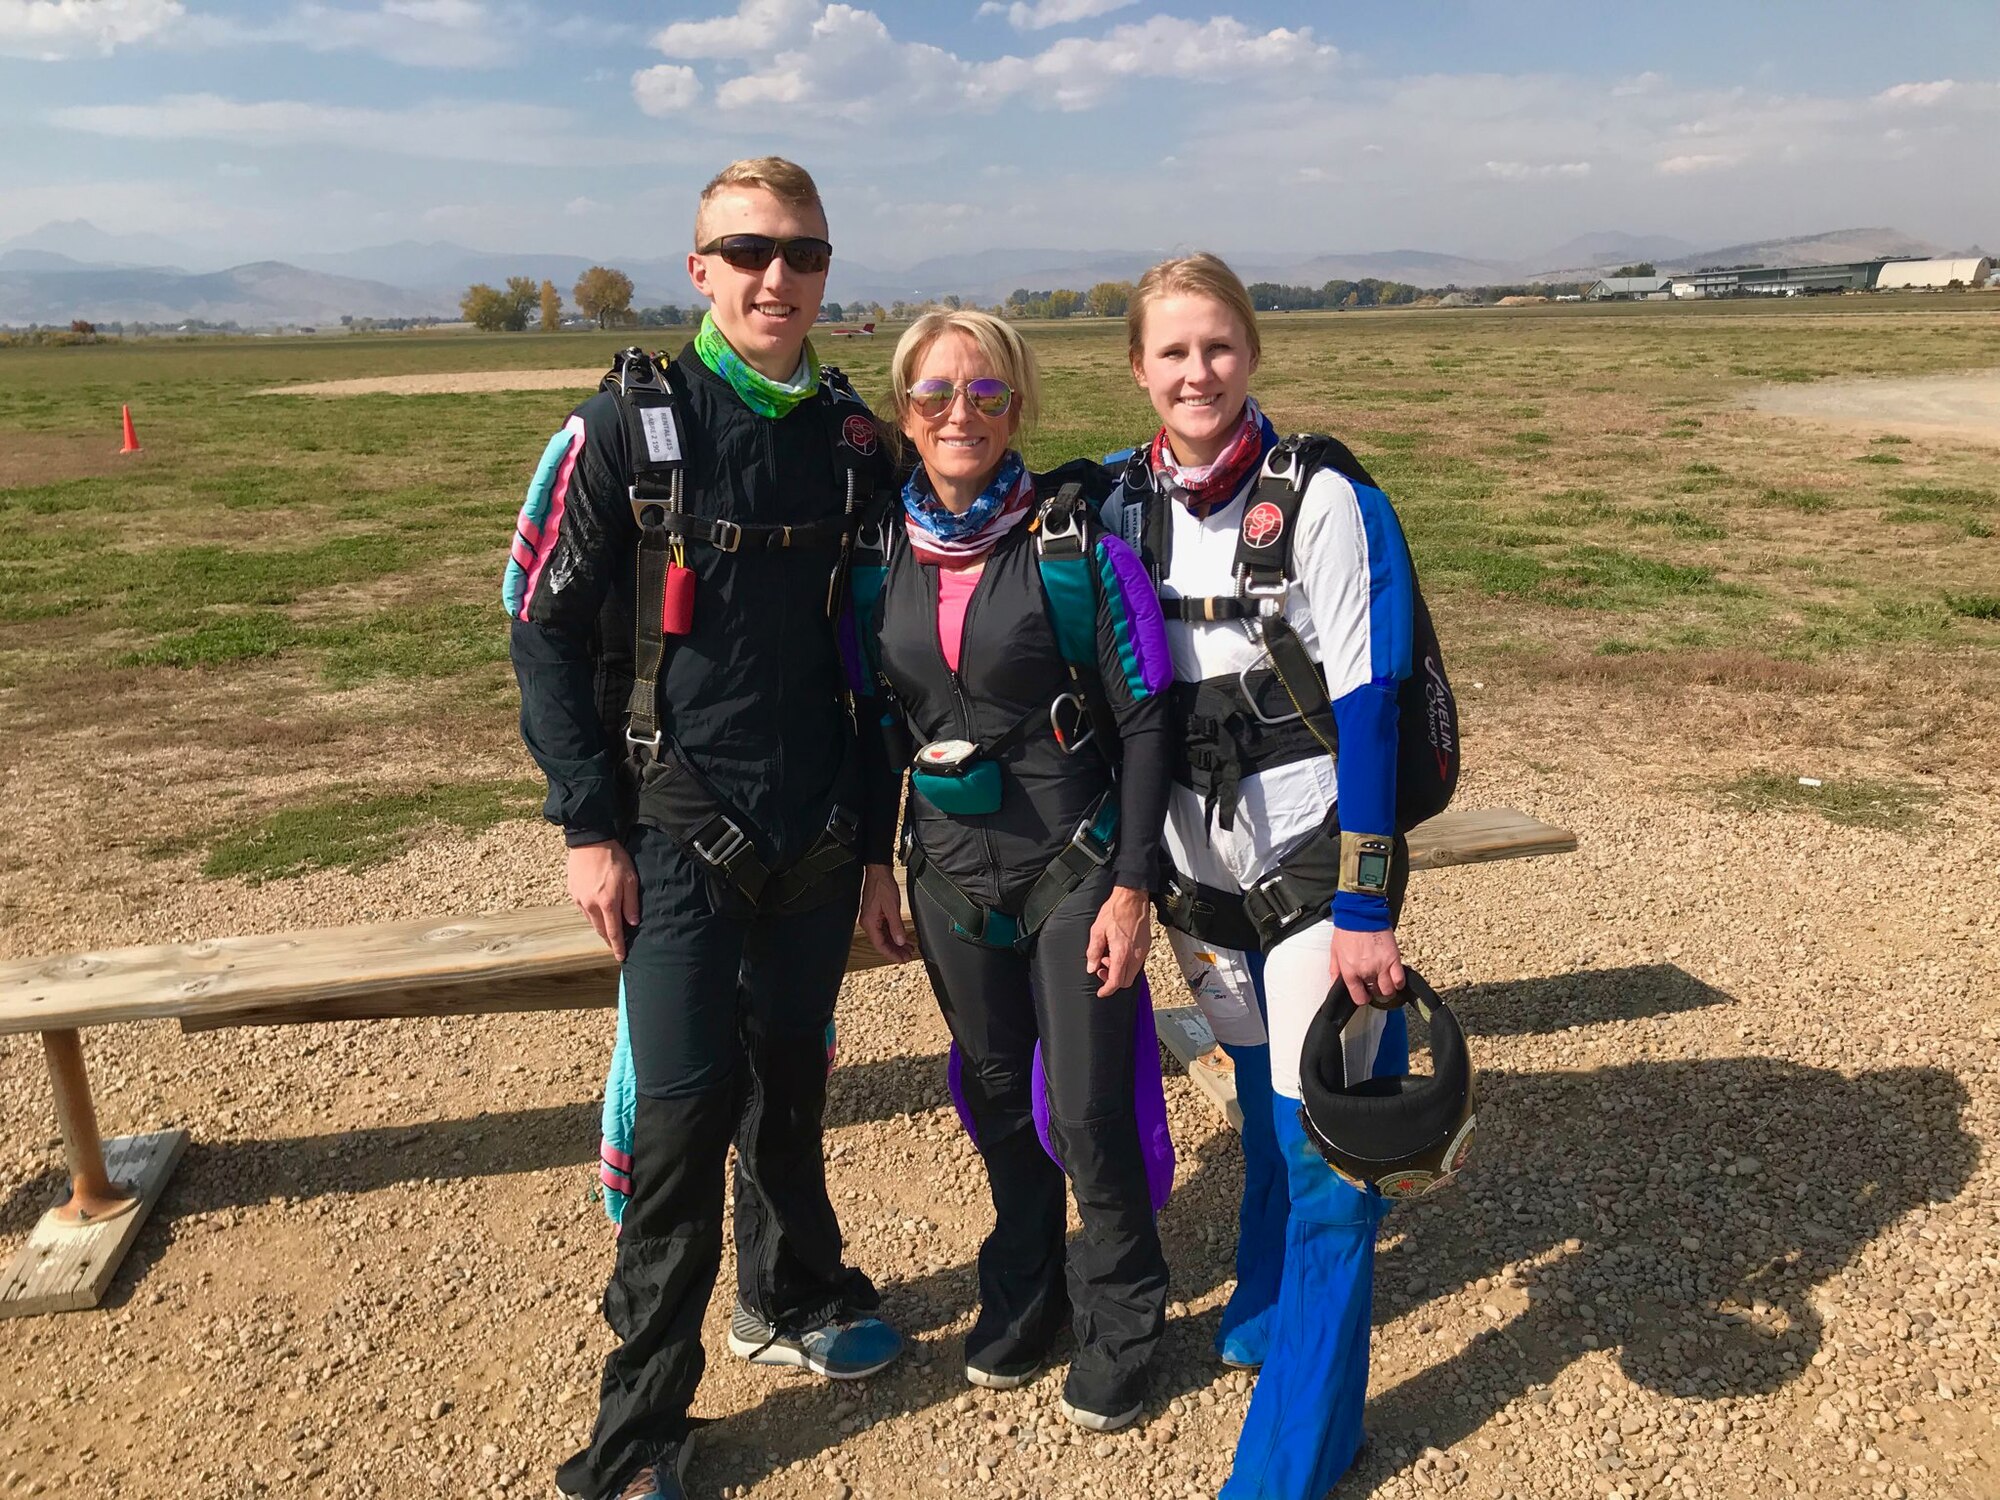 Brig. Gen. Kathleen Flarity, mobilization assistant to the command surgeon, Air Mobility Command (center), poses for a photo with her son, Patrick, and daughter, Tori, before a skydiving jump.